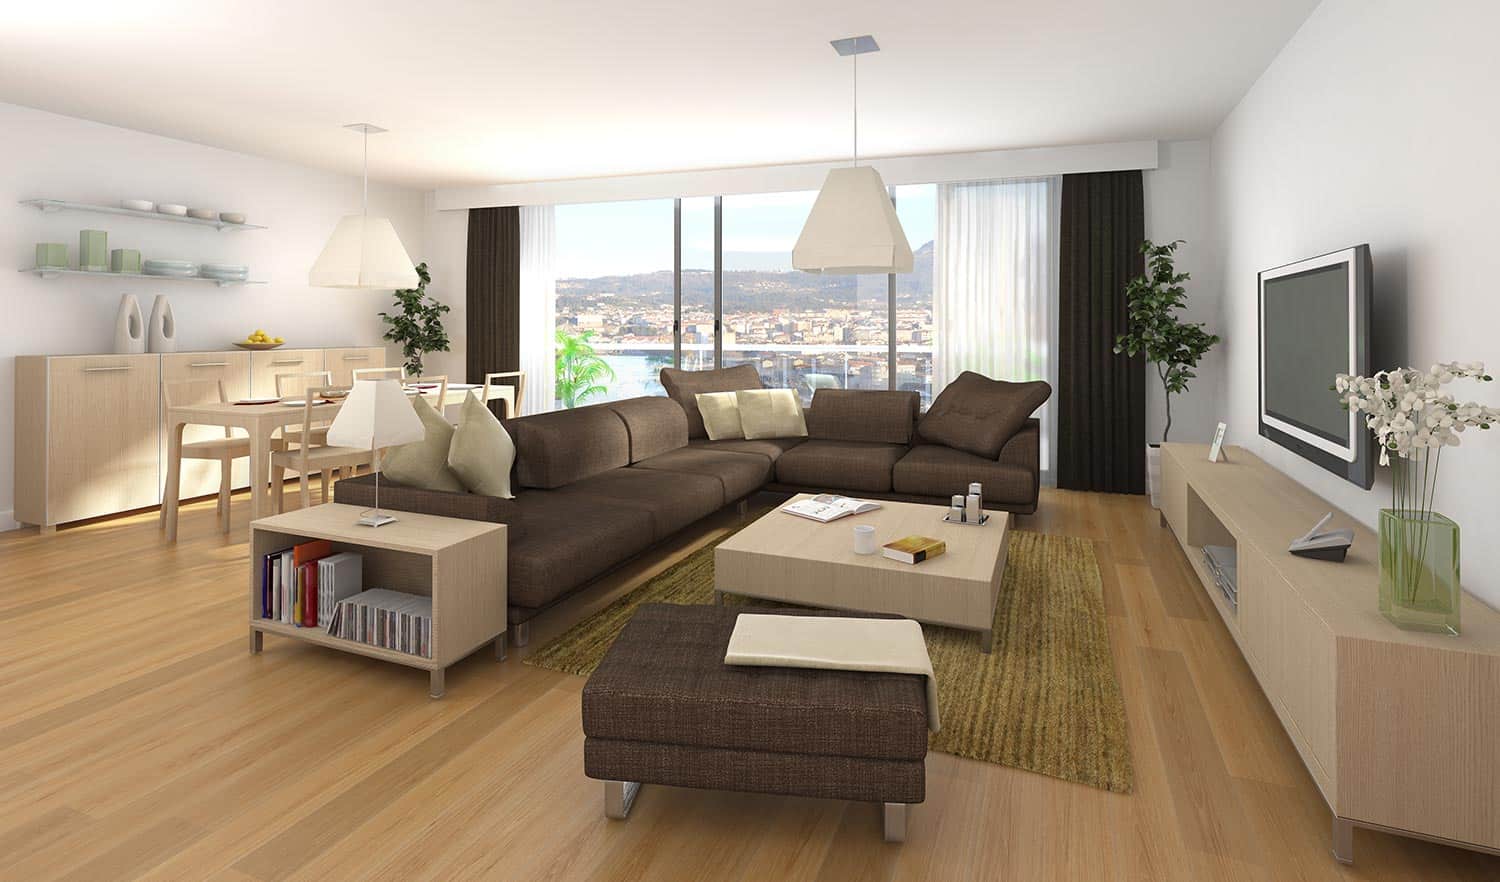 Interior design scene of modern apartment with living room and dinner room in wood and brown colors